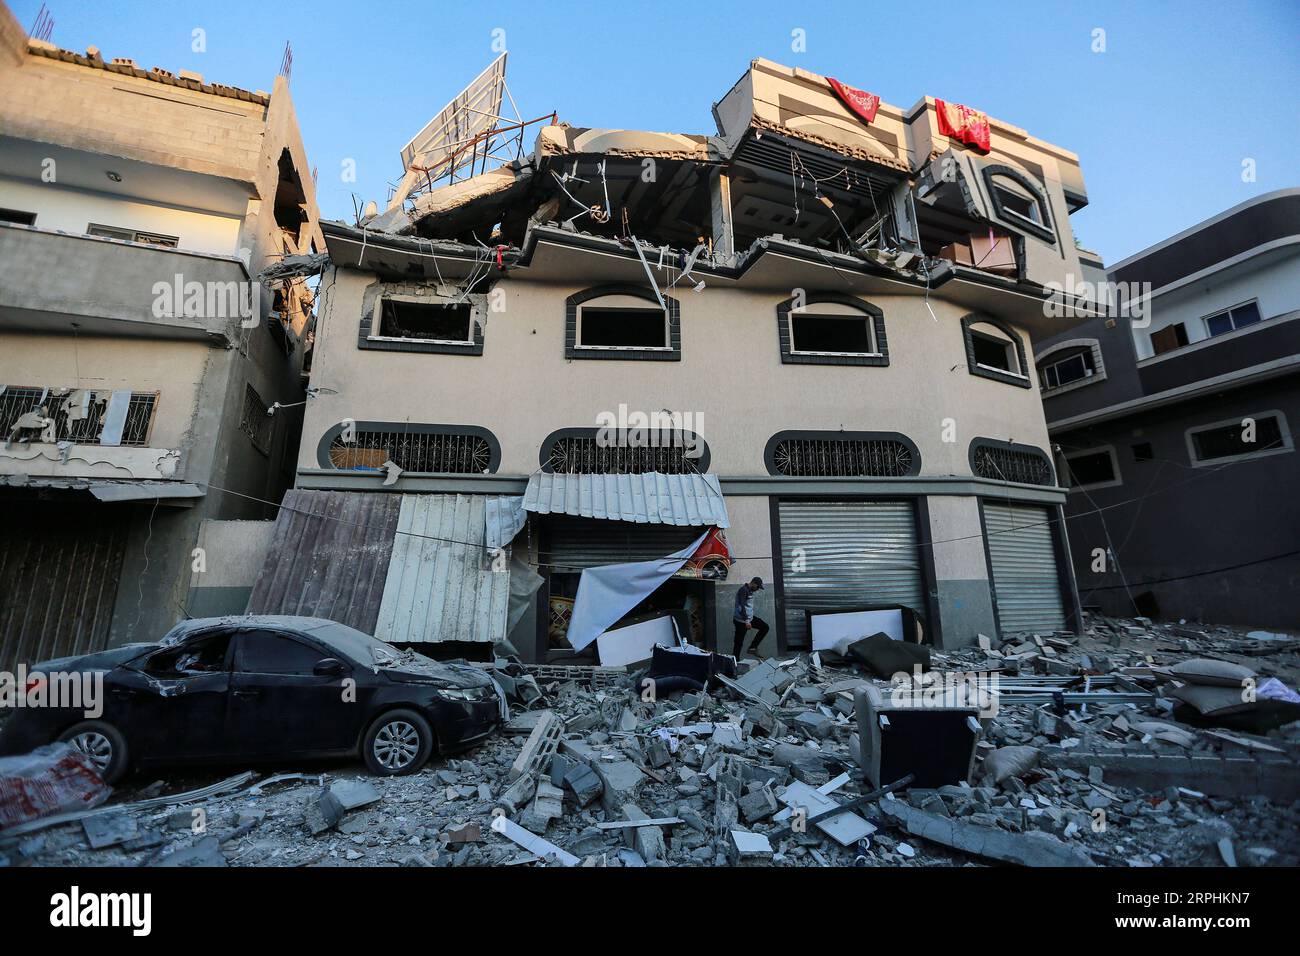 191112 -- GAZA, Nov. 12, 2019 Xinhua -- A Palestinian inspects the damaged house of Islamic Jihad leader Baha Abu al-Atta after an Israeli attack in Gaza City, Nov. 12, 2019. Baha Abu al-Atta, a senior militant and leader of al-Quds Brigades, the armed wing of the Palestinian Islamic Jihad in the Gaza Strip, and his wife were killed earlier Tuesday in an Israeli aerial attack on their house in eastern Gaza city. Photo by Mohammed Dahman/Xinhua MIDEAST-GAZA-ATTACK PUBLICATIONxNOTxINxCHN Stock Photo